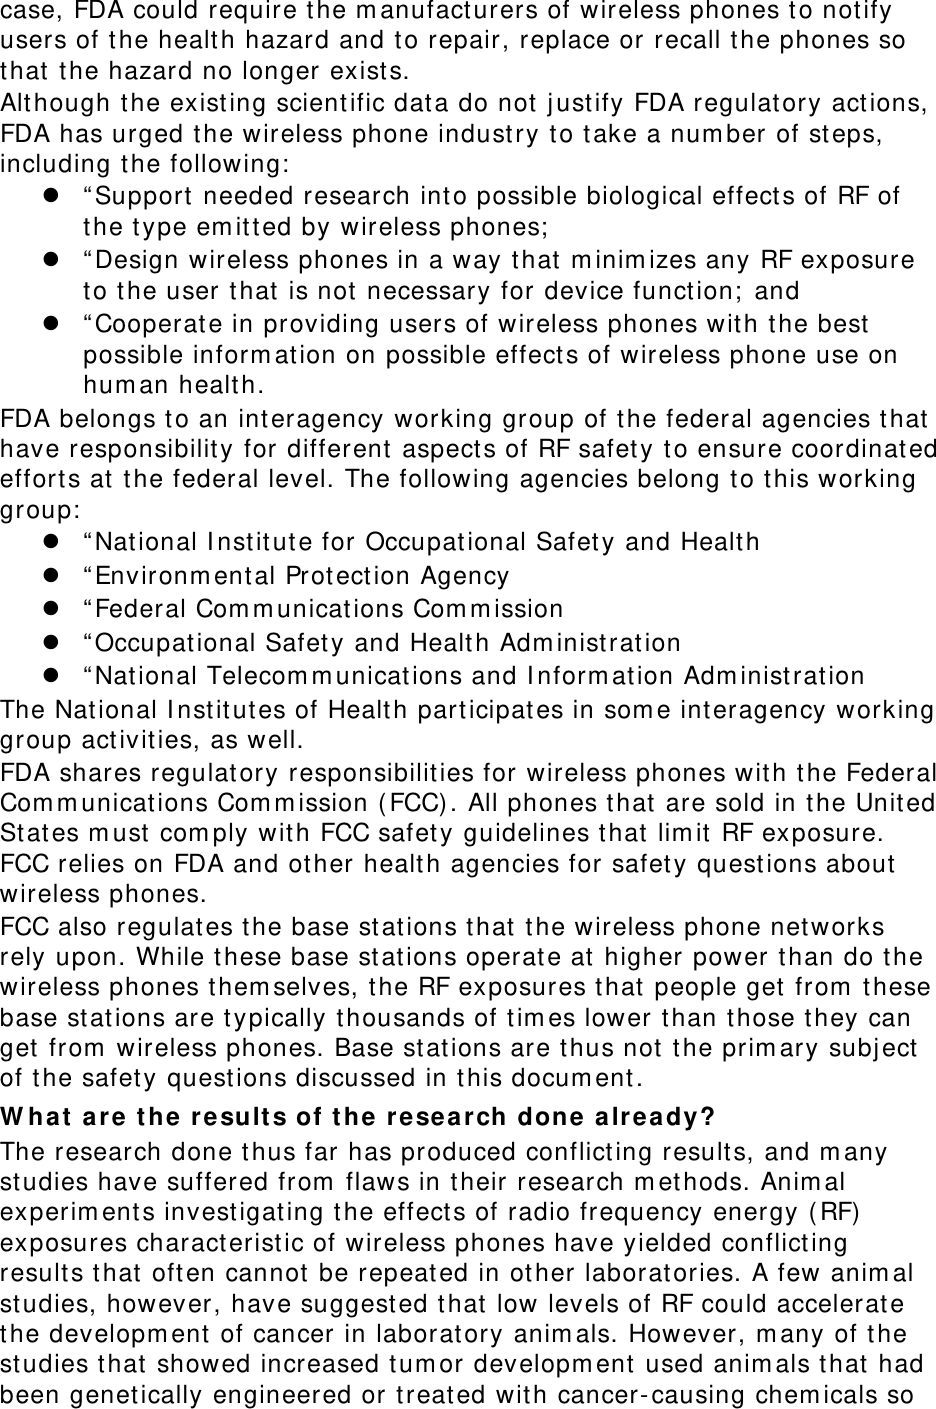 case, FDA could require t he m anufact urers of w ireless phones t o not ify users of t he health hazard and t o repair, replace or recall t he phones so that the hazard no longer exist s. Alt hough t he existing scient ific dat a do not j ust ify FDA regulat ory actions, FDA has urged the wireless phone industry to t ake a num ber of st eps, including t he following:  z “ Support  needed research int o possible biological effect s of RF of the type em itt ed by wireless phones;  z “ Design wireless phones in a way t hat m inim izes any RF exposure to the user t hat is not necessary for device funct ion;  and z “ Cooperat e in providing users of wireless phones with t he best  possible inform ation on possible effect s of wireless phone use on hum an healt h. FDA belongs to an int eragency working group of the federal agencies t hat have responsibility for different aspect s of RF safet y t o ensure coordinat ed effort s at the federal level. The following agencies belong t o t his working group:  z “ Nat ional I nstit ut e for Occupational Safet y and Health z “ Environm ent al Prot ection Agency z “ Federal Com m unicat ions Com m ission z “ Occupational Safety and Health Adm inist ration z “ Nat ional Telecom m unications and I nform ation Adm inistrat ion The National I nstit ut es of Health participat es in som e interagency working group act ivit ies, as well. FDA shares regulatory responsibilit ies for wireless phones with t he Federal Com m unications Com m ission ( FCC) . All phones t hat  are sold in t he United St ates m ust com ply wit h FCC safety guidelines that  lim it  RF exposure. FCC relies on FDA and other health agencies for safet y quest ions about  wireless phones. FCC also regulat es the base stat ions t hat the wireless phone networks rely upon. While t hese base stat ions operate at higher power t han do t he wireless phones t hem selves, t he RF exposures t hat  people get from  t hese base stations are t ypically t housands of t im es lower than t hose they can get  from  wireless phones. Base stations are thus not the prim ary subj ect  of t he safet y quest ions discussed in this docum ent . W ha t ar e t he r esult s of t he  rese arch done  alr eady? The research done thus far has produced conflict ing results, and m any studies have suffered from  flaws in their research m et hods. Anim al experim ent s invest igat ing t he effect s of radio frequency energy ( RF) exposures characterist ic of wireless phones have yielded conflict ing results that often cannot be repeated in other laboratories. A few anim al studies, however, have suggested t hat  low levels of RF could accelerat e the developm ent of cancer in laboratory anim als. However, m any of t he studies t hat showed increased tum or developm ent used anim als t hat  had been genet ically engineered or t reat ed wit h cancer- causing chem icals so 